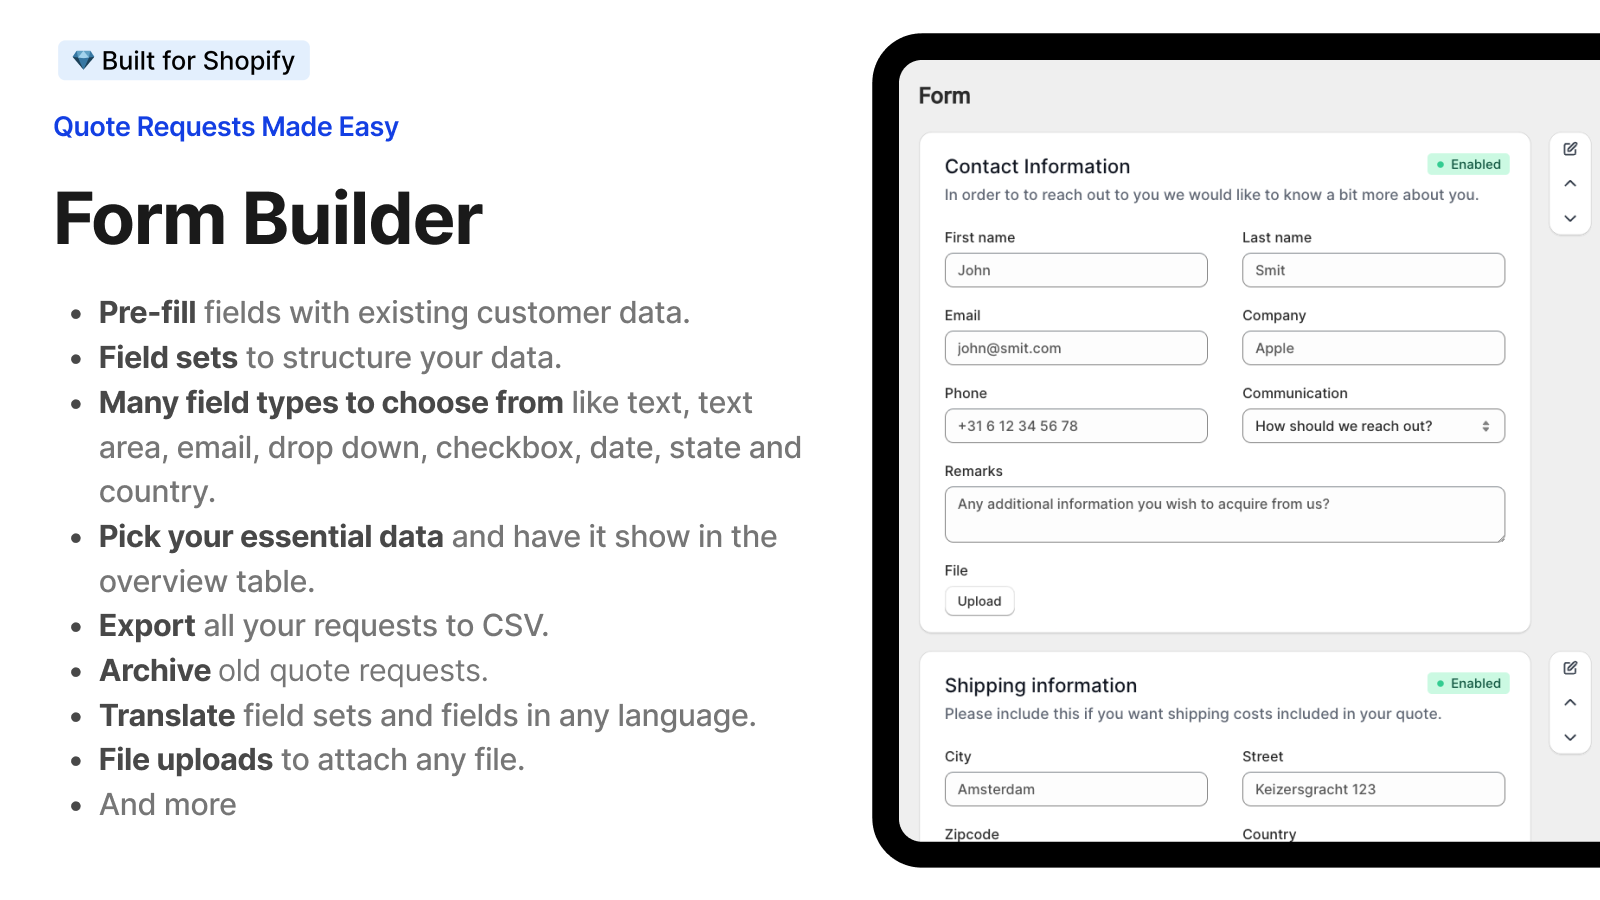 Design your own form and collect the information you need.